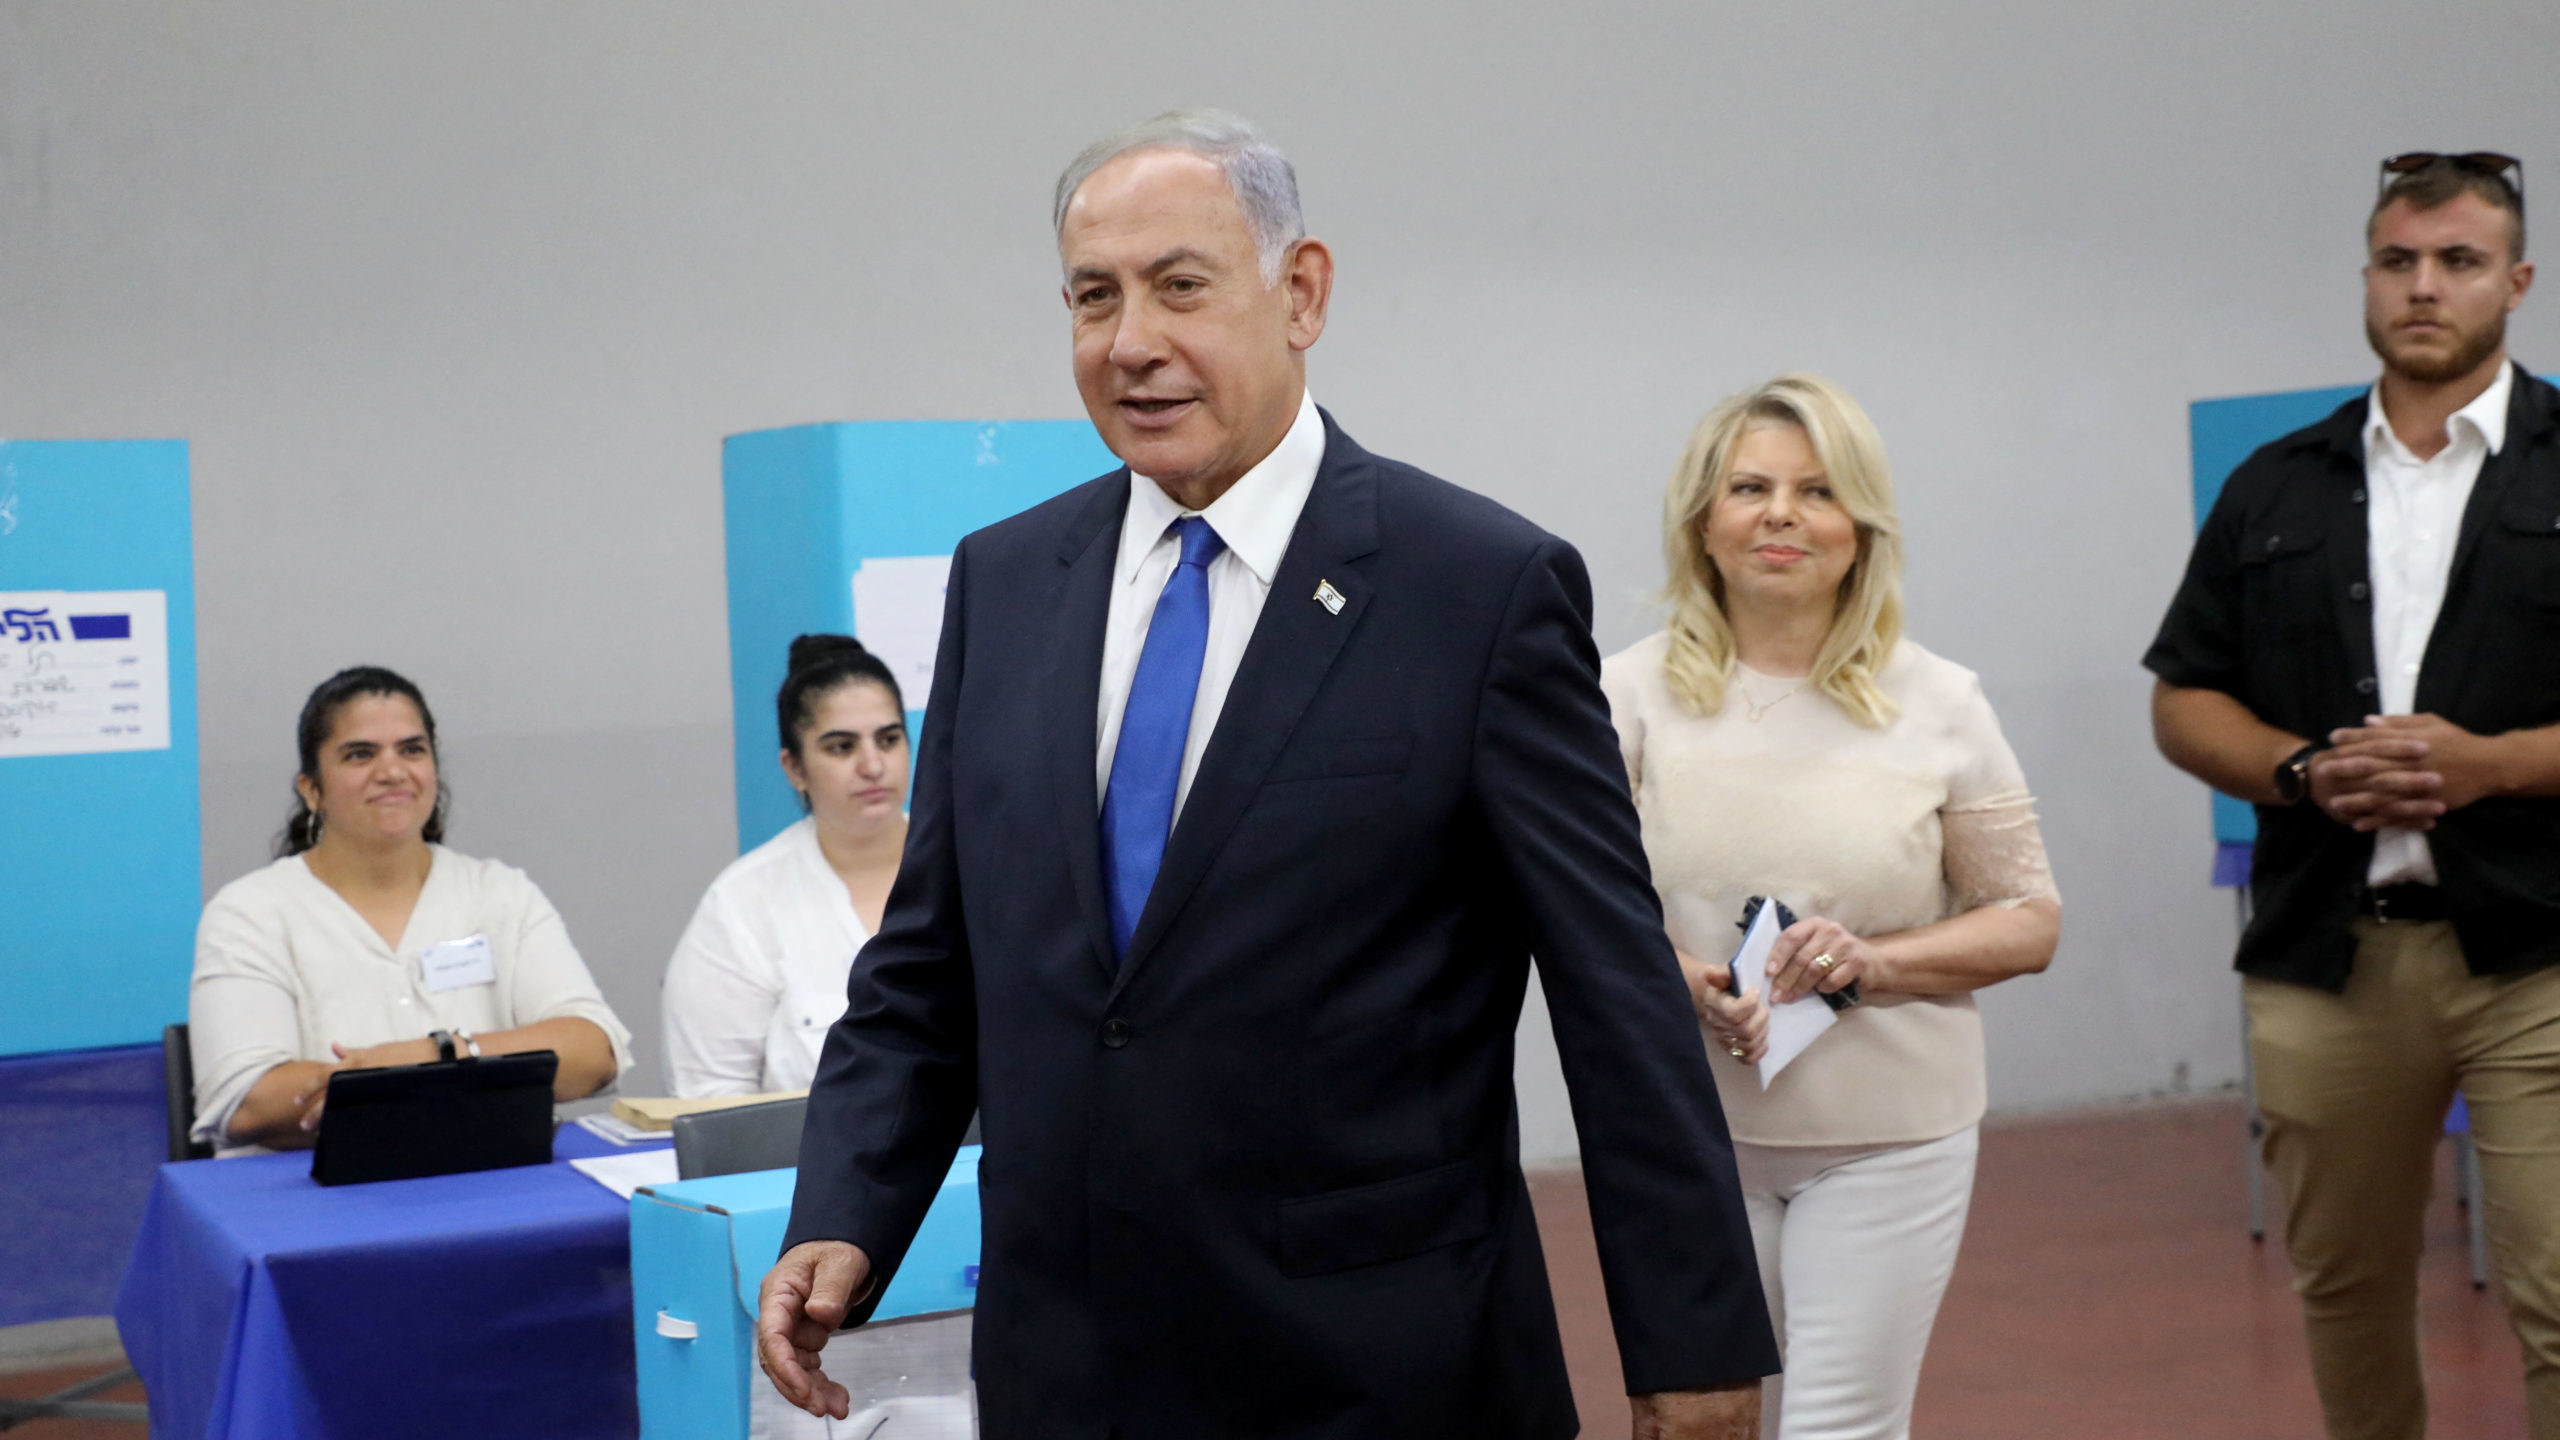 Likud Holds Primary for Knesset Candidates List Amid Corruption Allegations, Slow Turnout